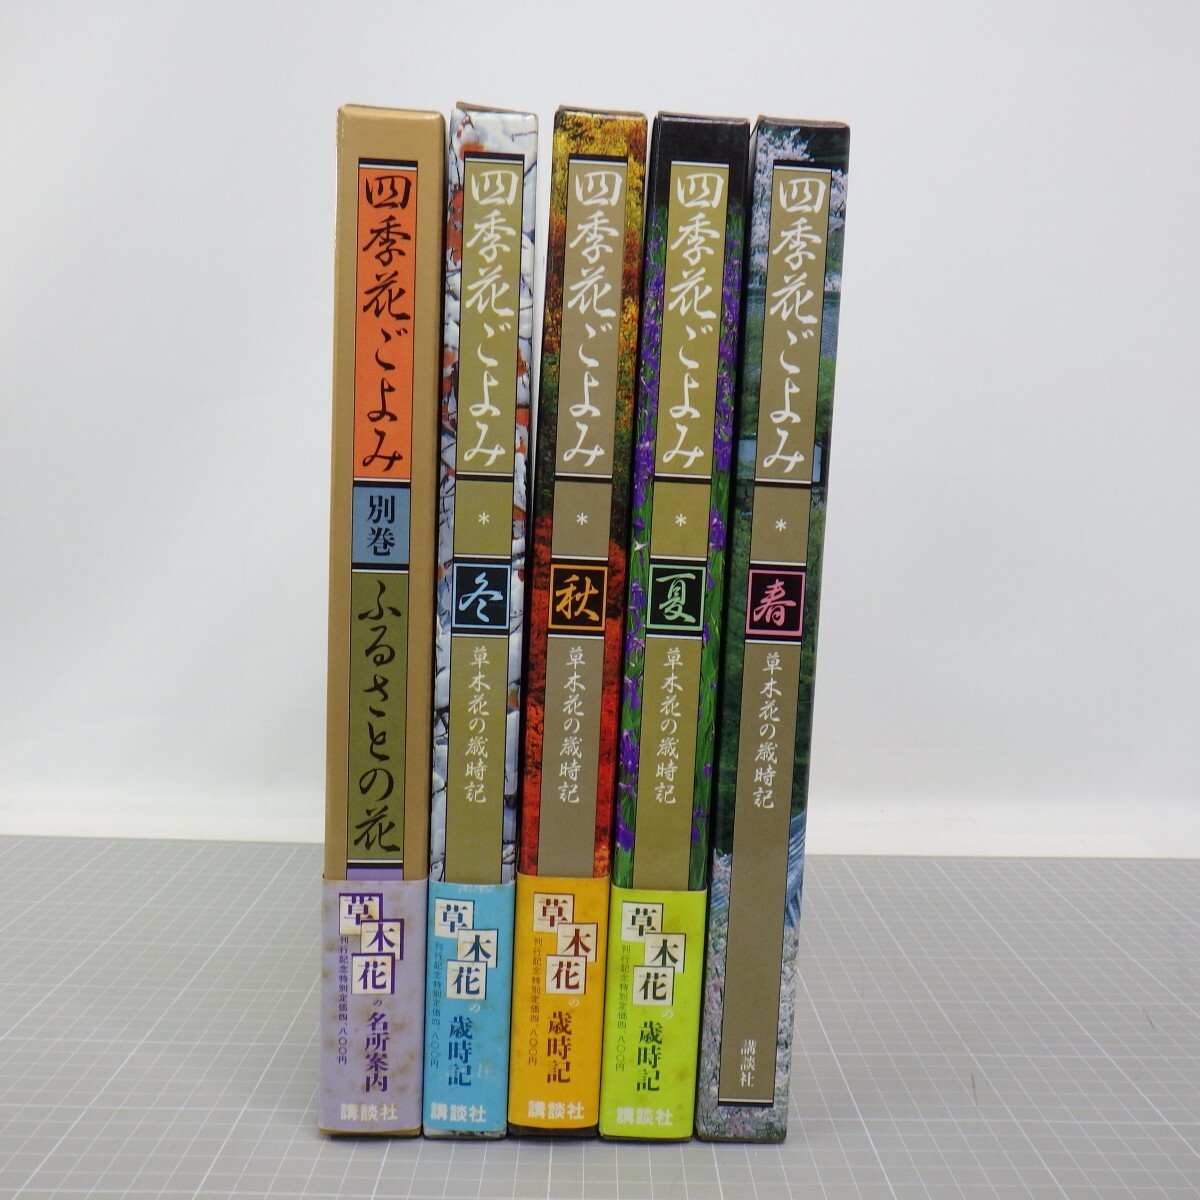 [ four season flower ...]. tree flower -years old hour chronicle all 4 volume + another volume total 5 pcs. ./.. company / all volume set 80